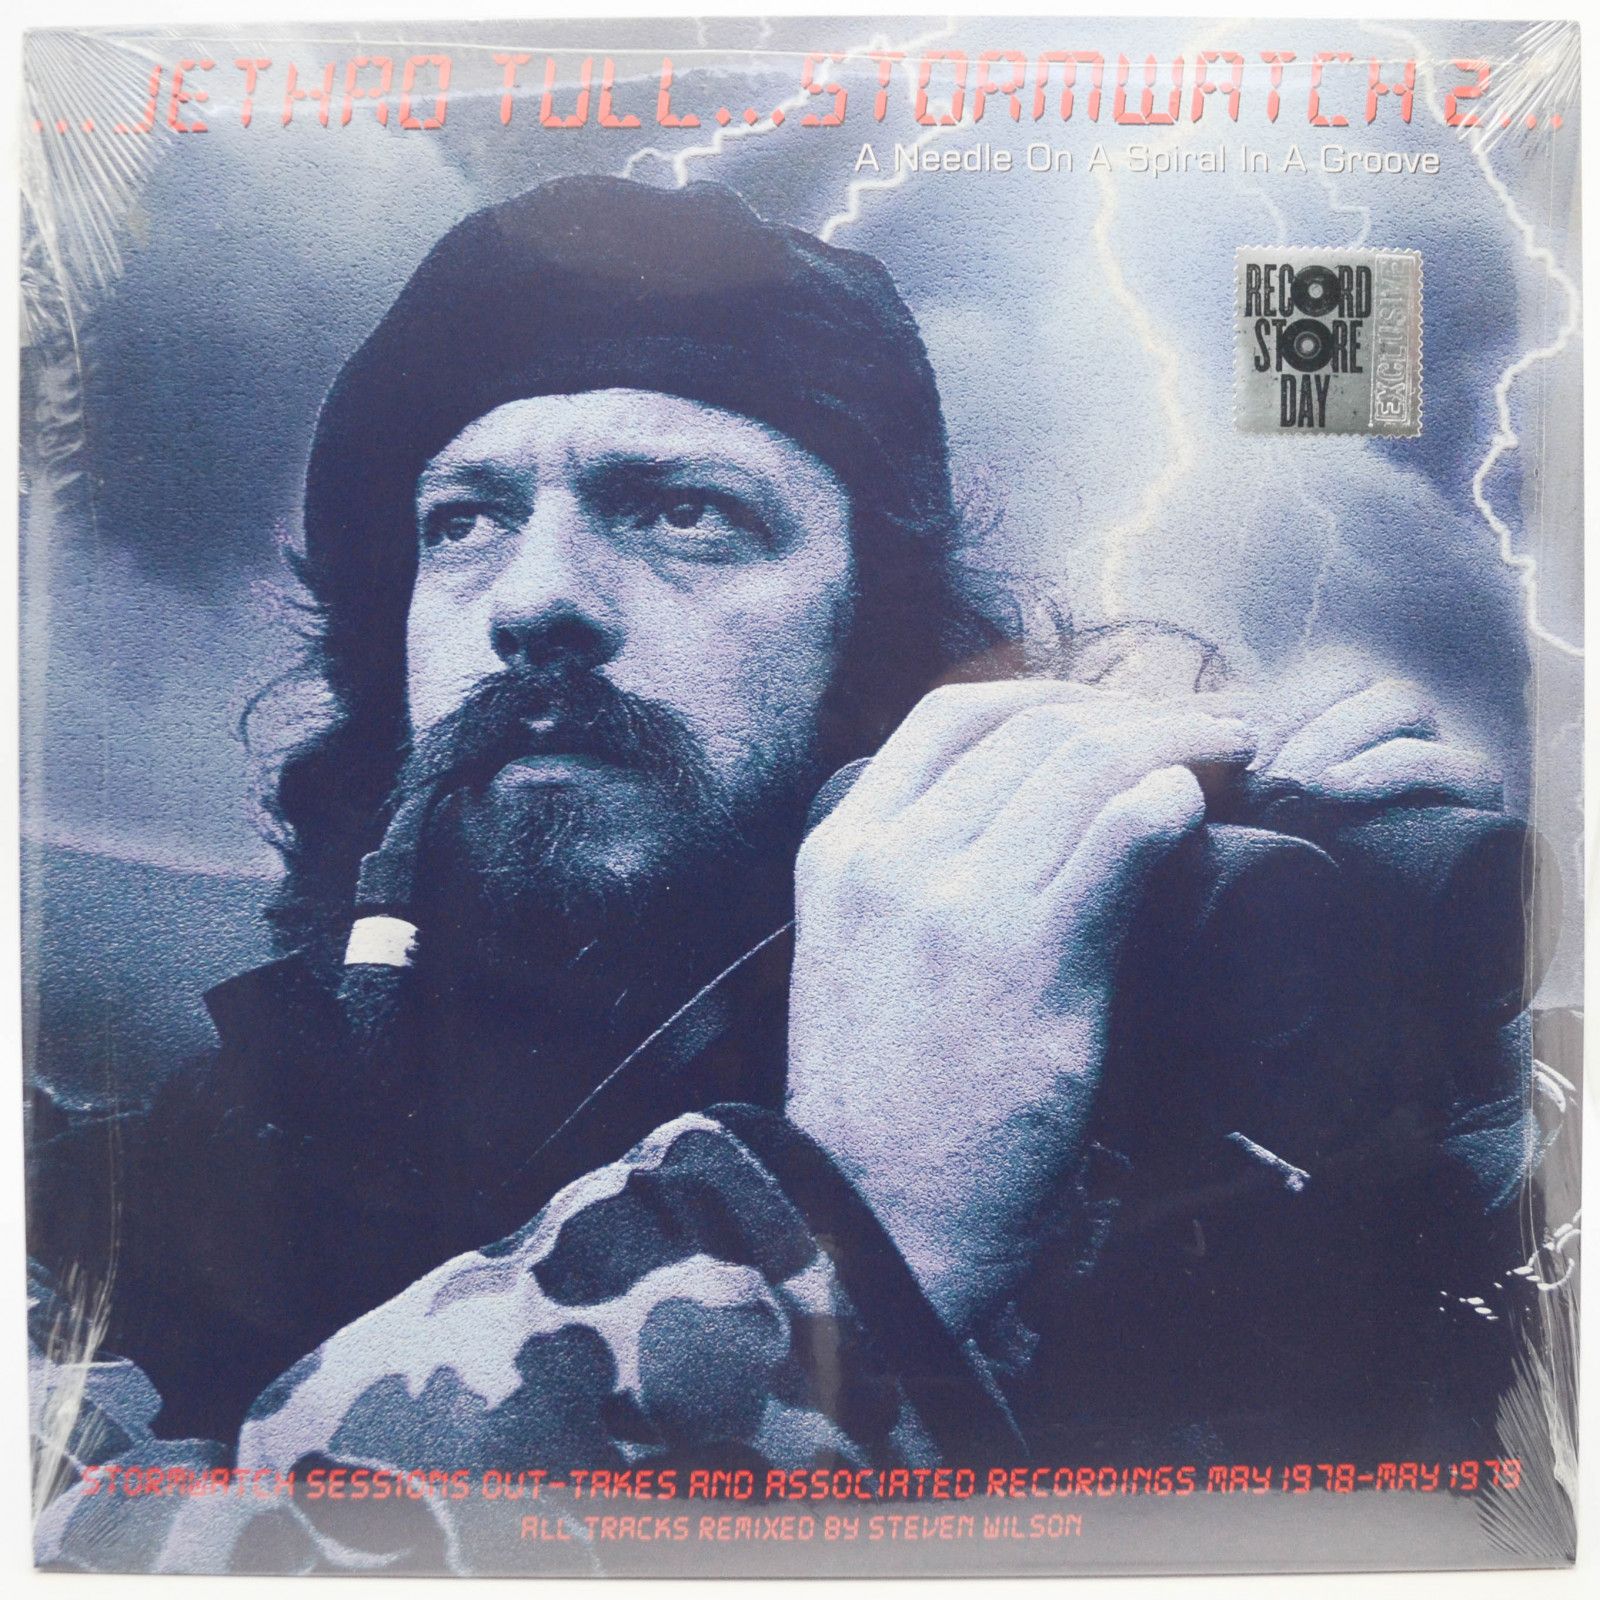 Jethro Tull — Stormwatch 2 (A Needle On A Spiral In A Groove), 2020